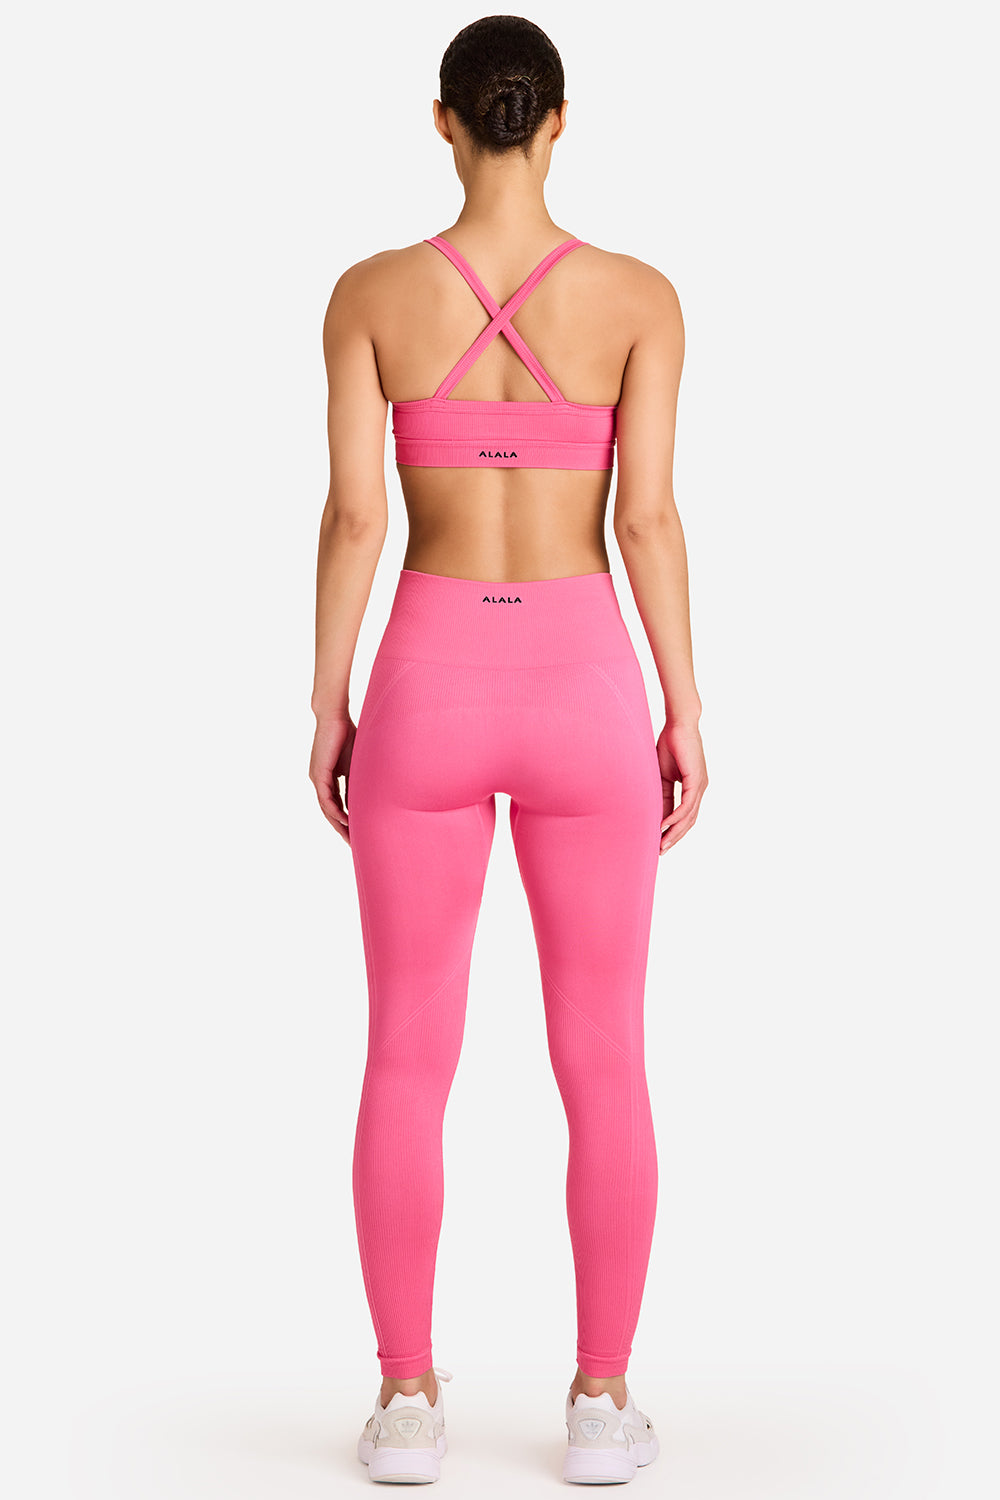 Alala Barre Cami Bra for women in Pink Punch